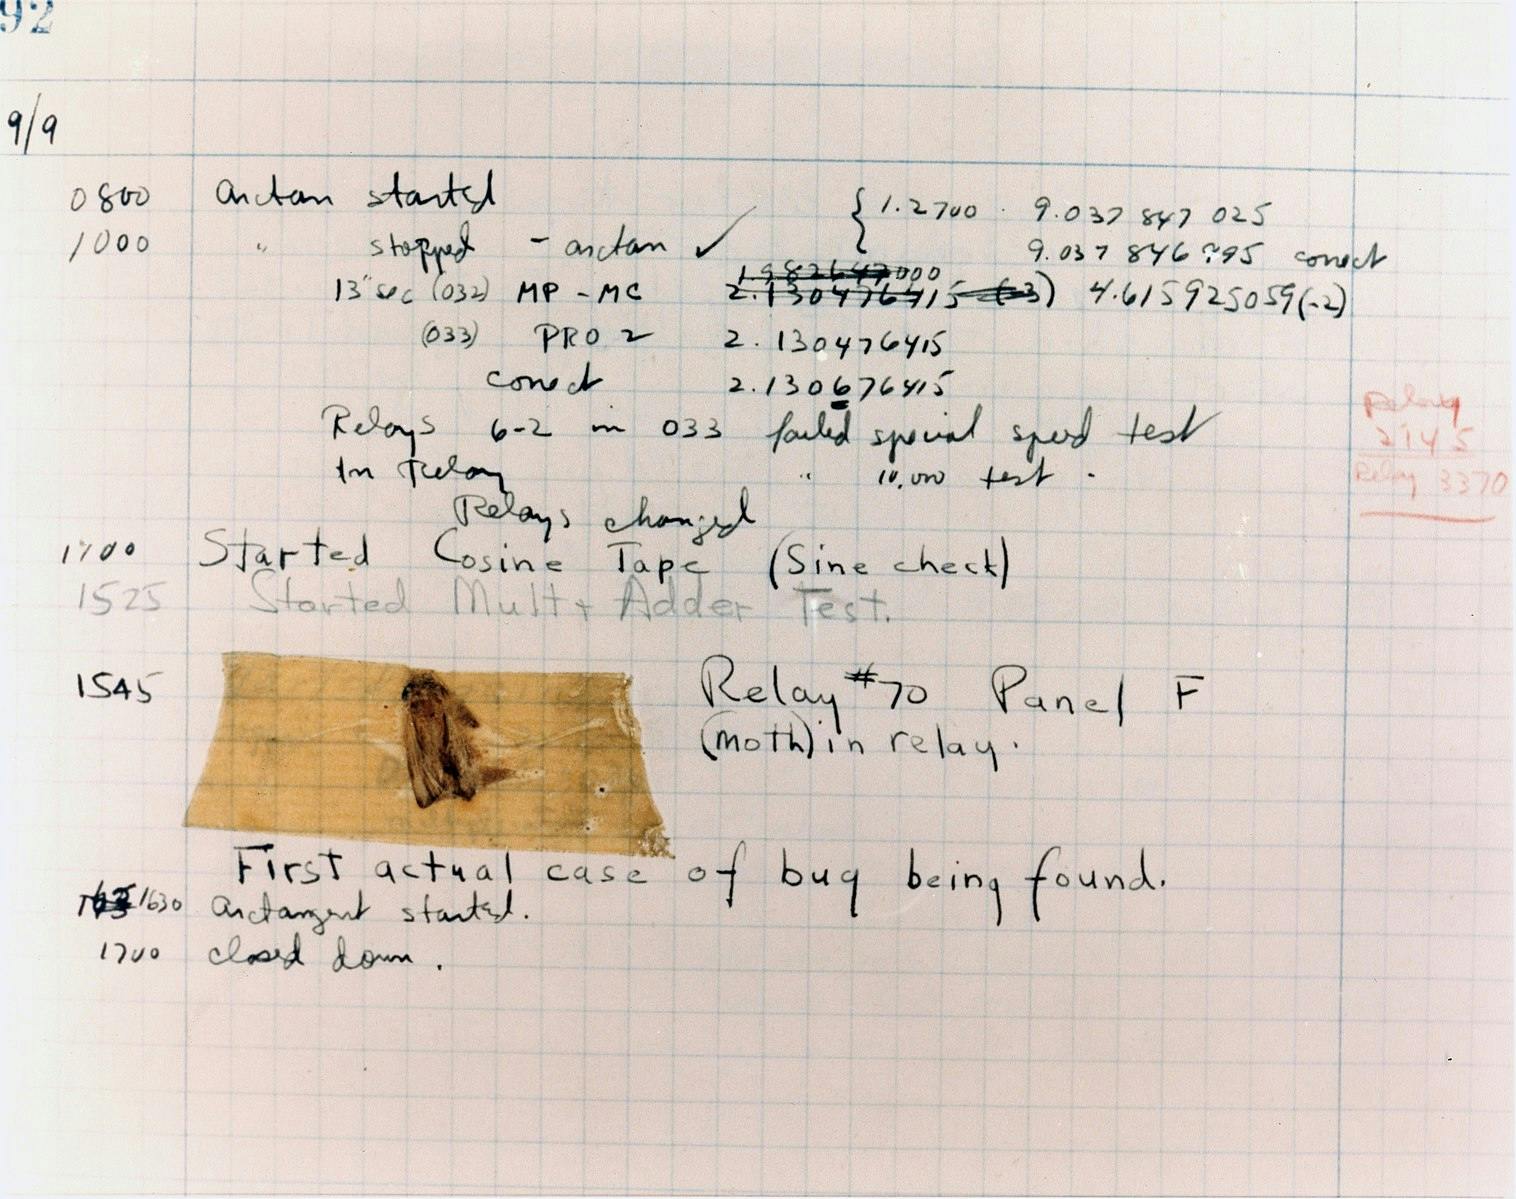 pge from a log book with insect taped to the paper and words &ldquo;first actual case of bug being found&rdquo;